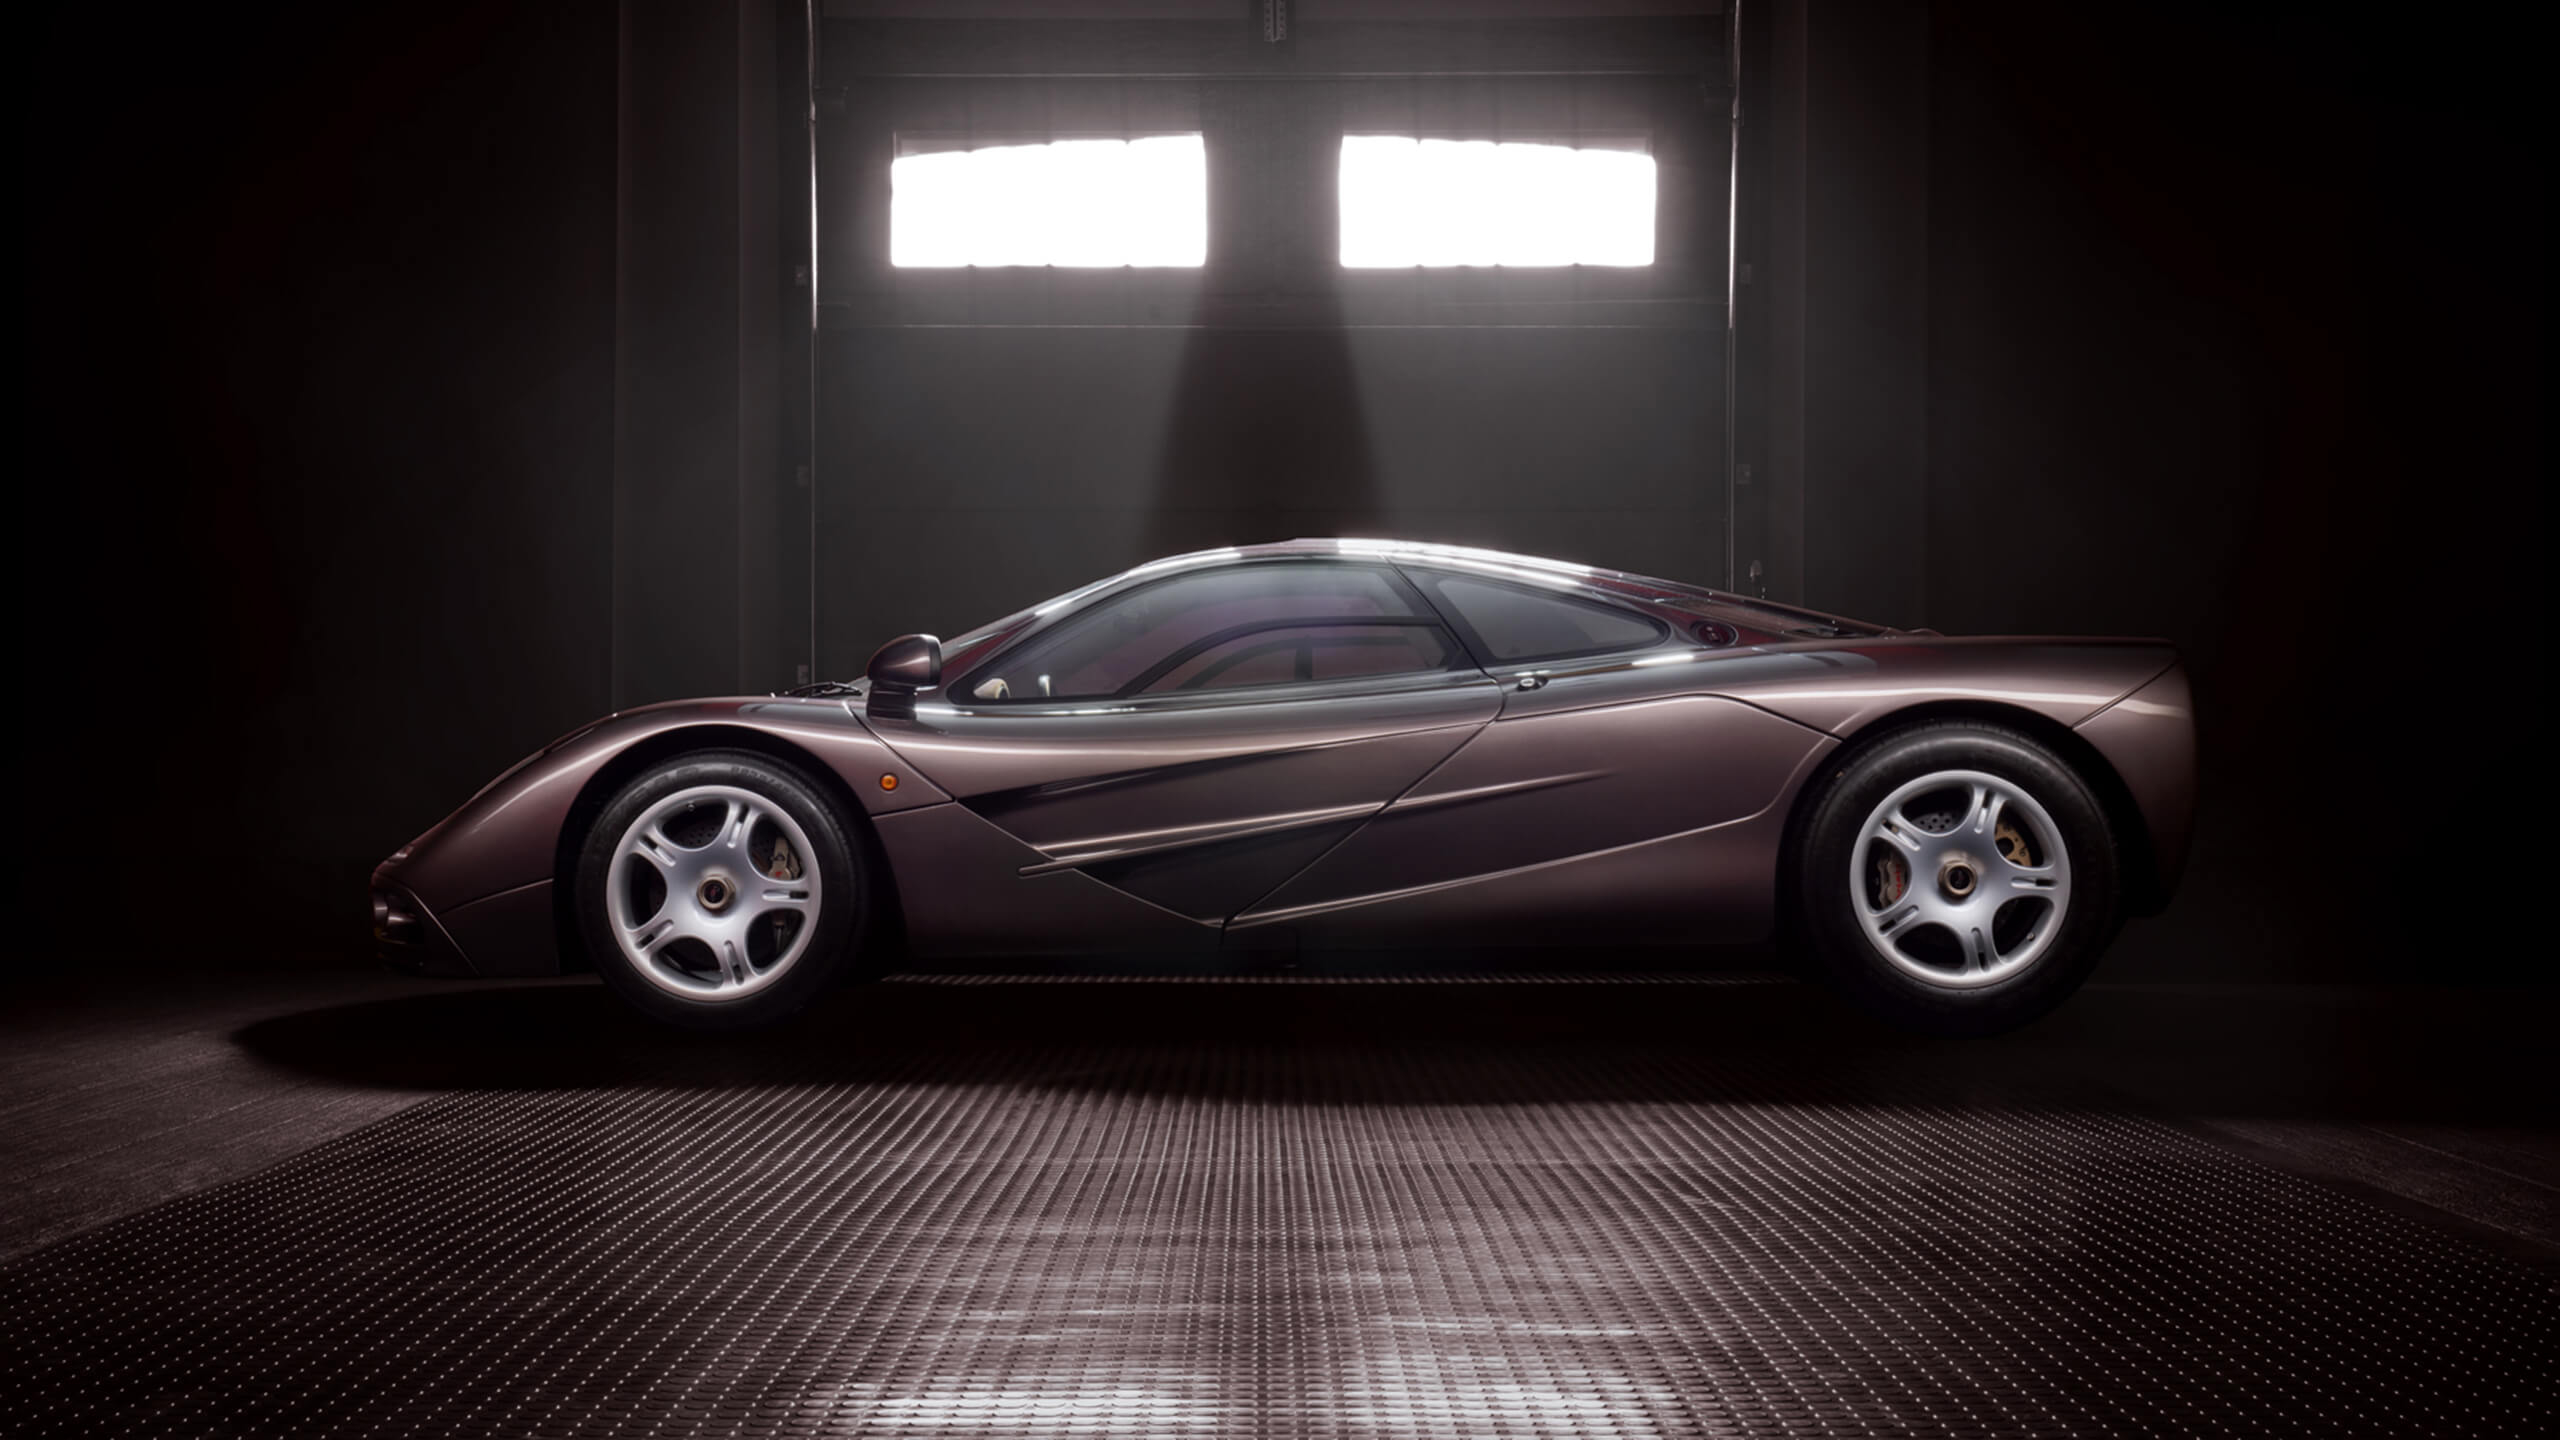 Gooding to offer McLaren F1 at Pebble Beach for $15m+